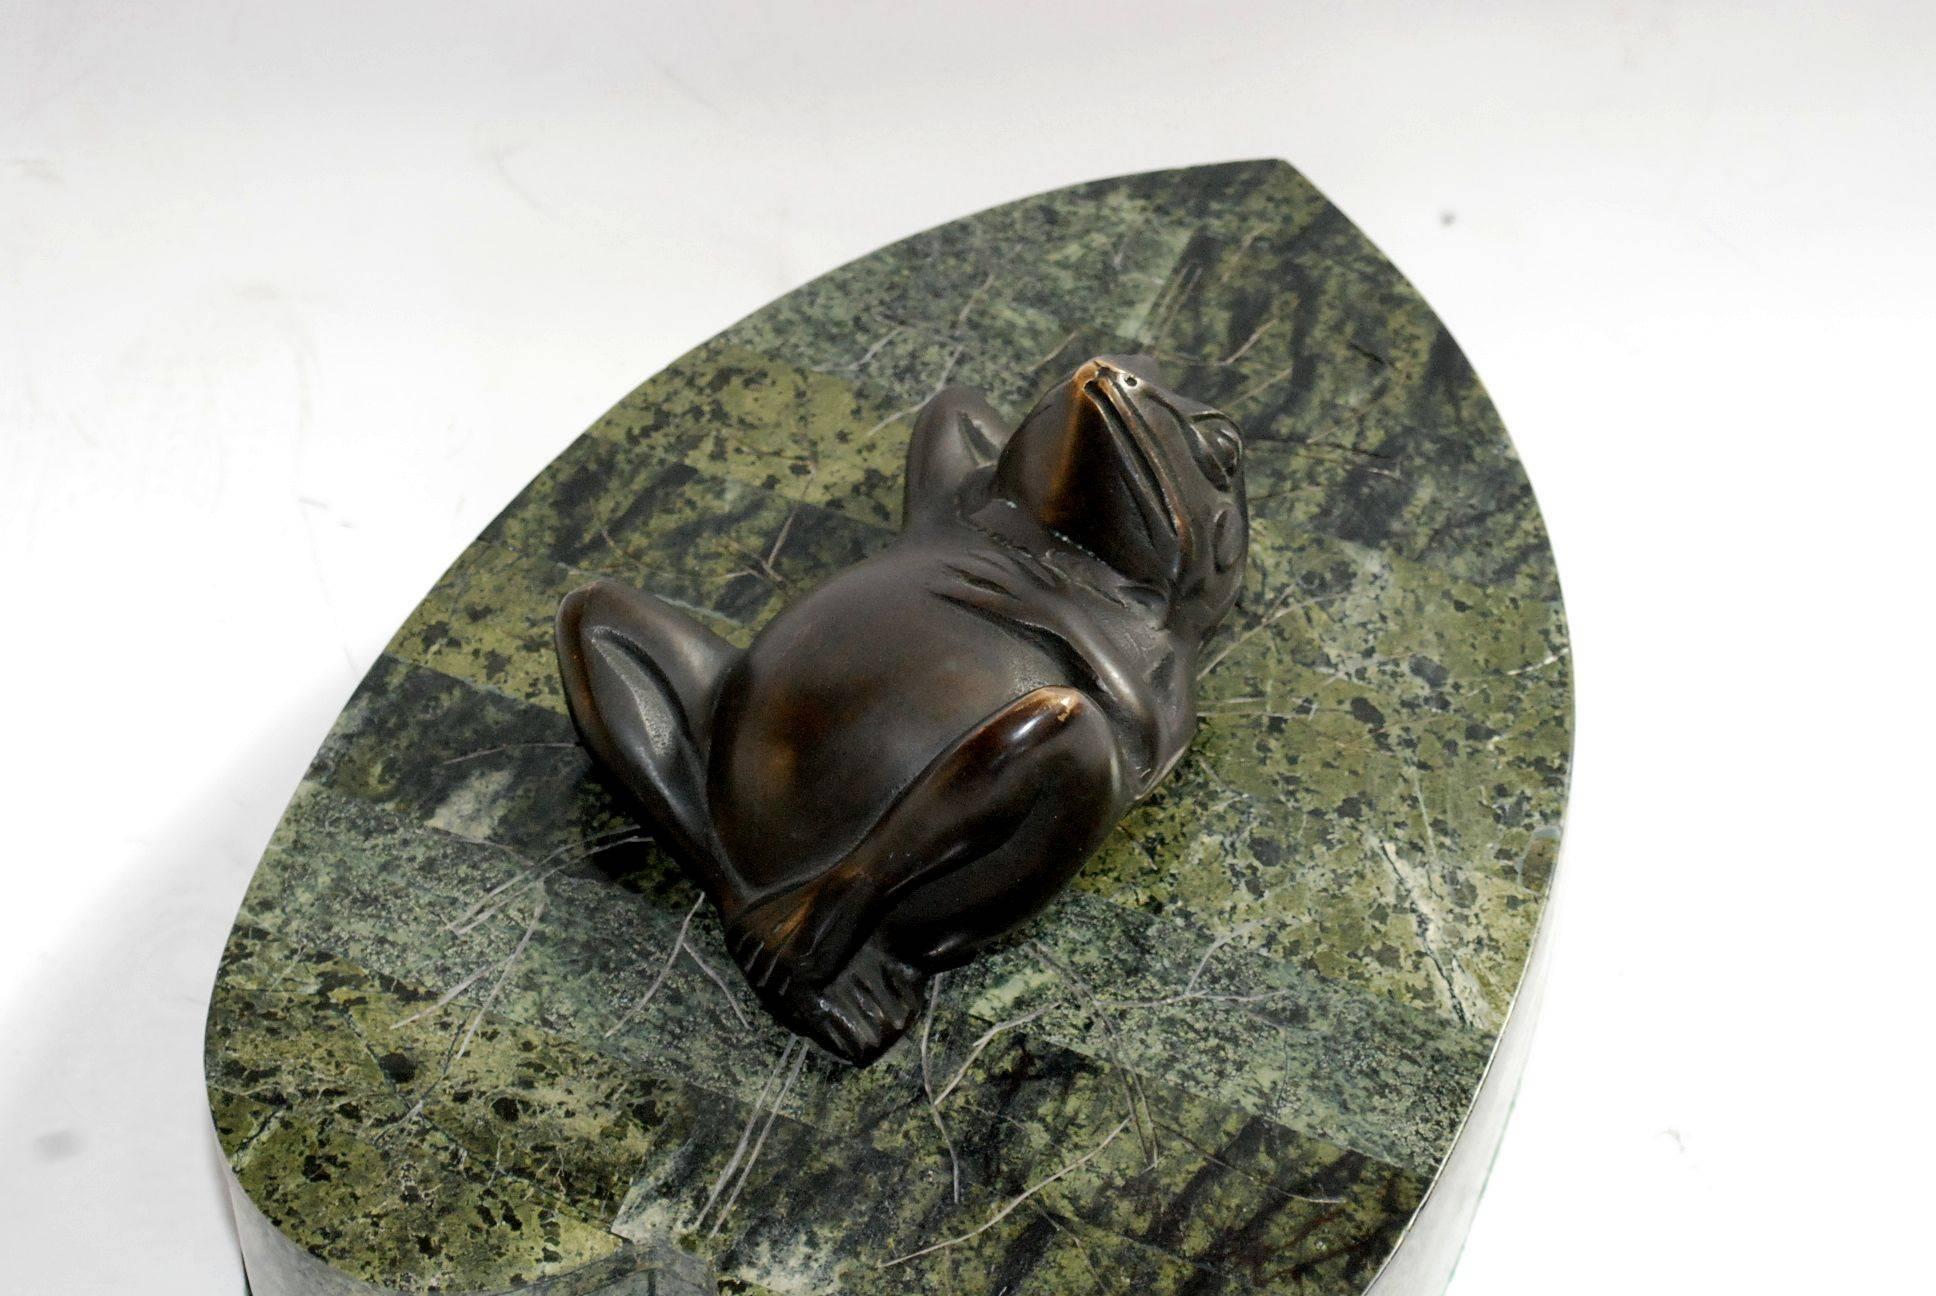 Green tessellated marble with on draw and large solid bronze frog jewelry box.